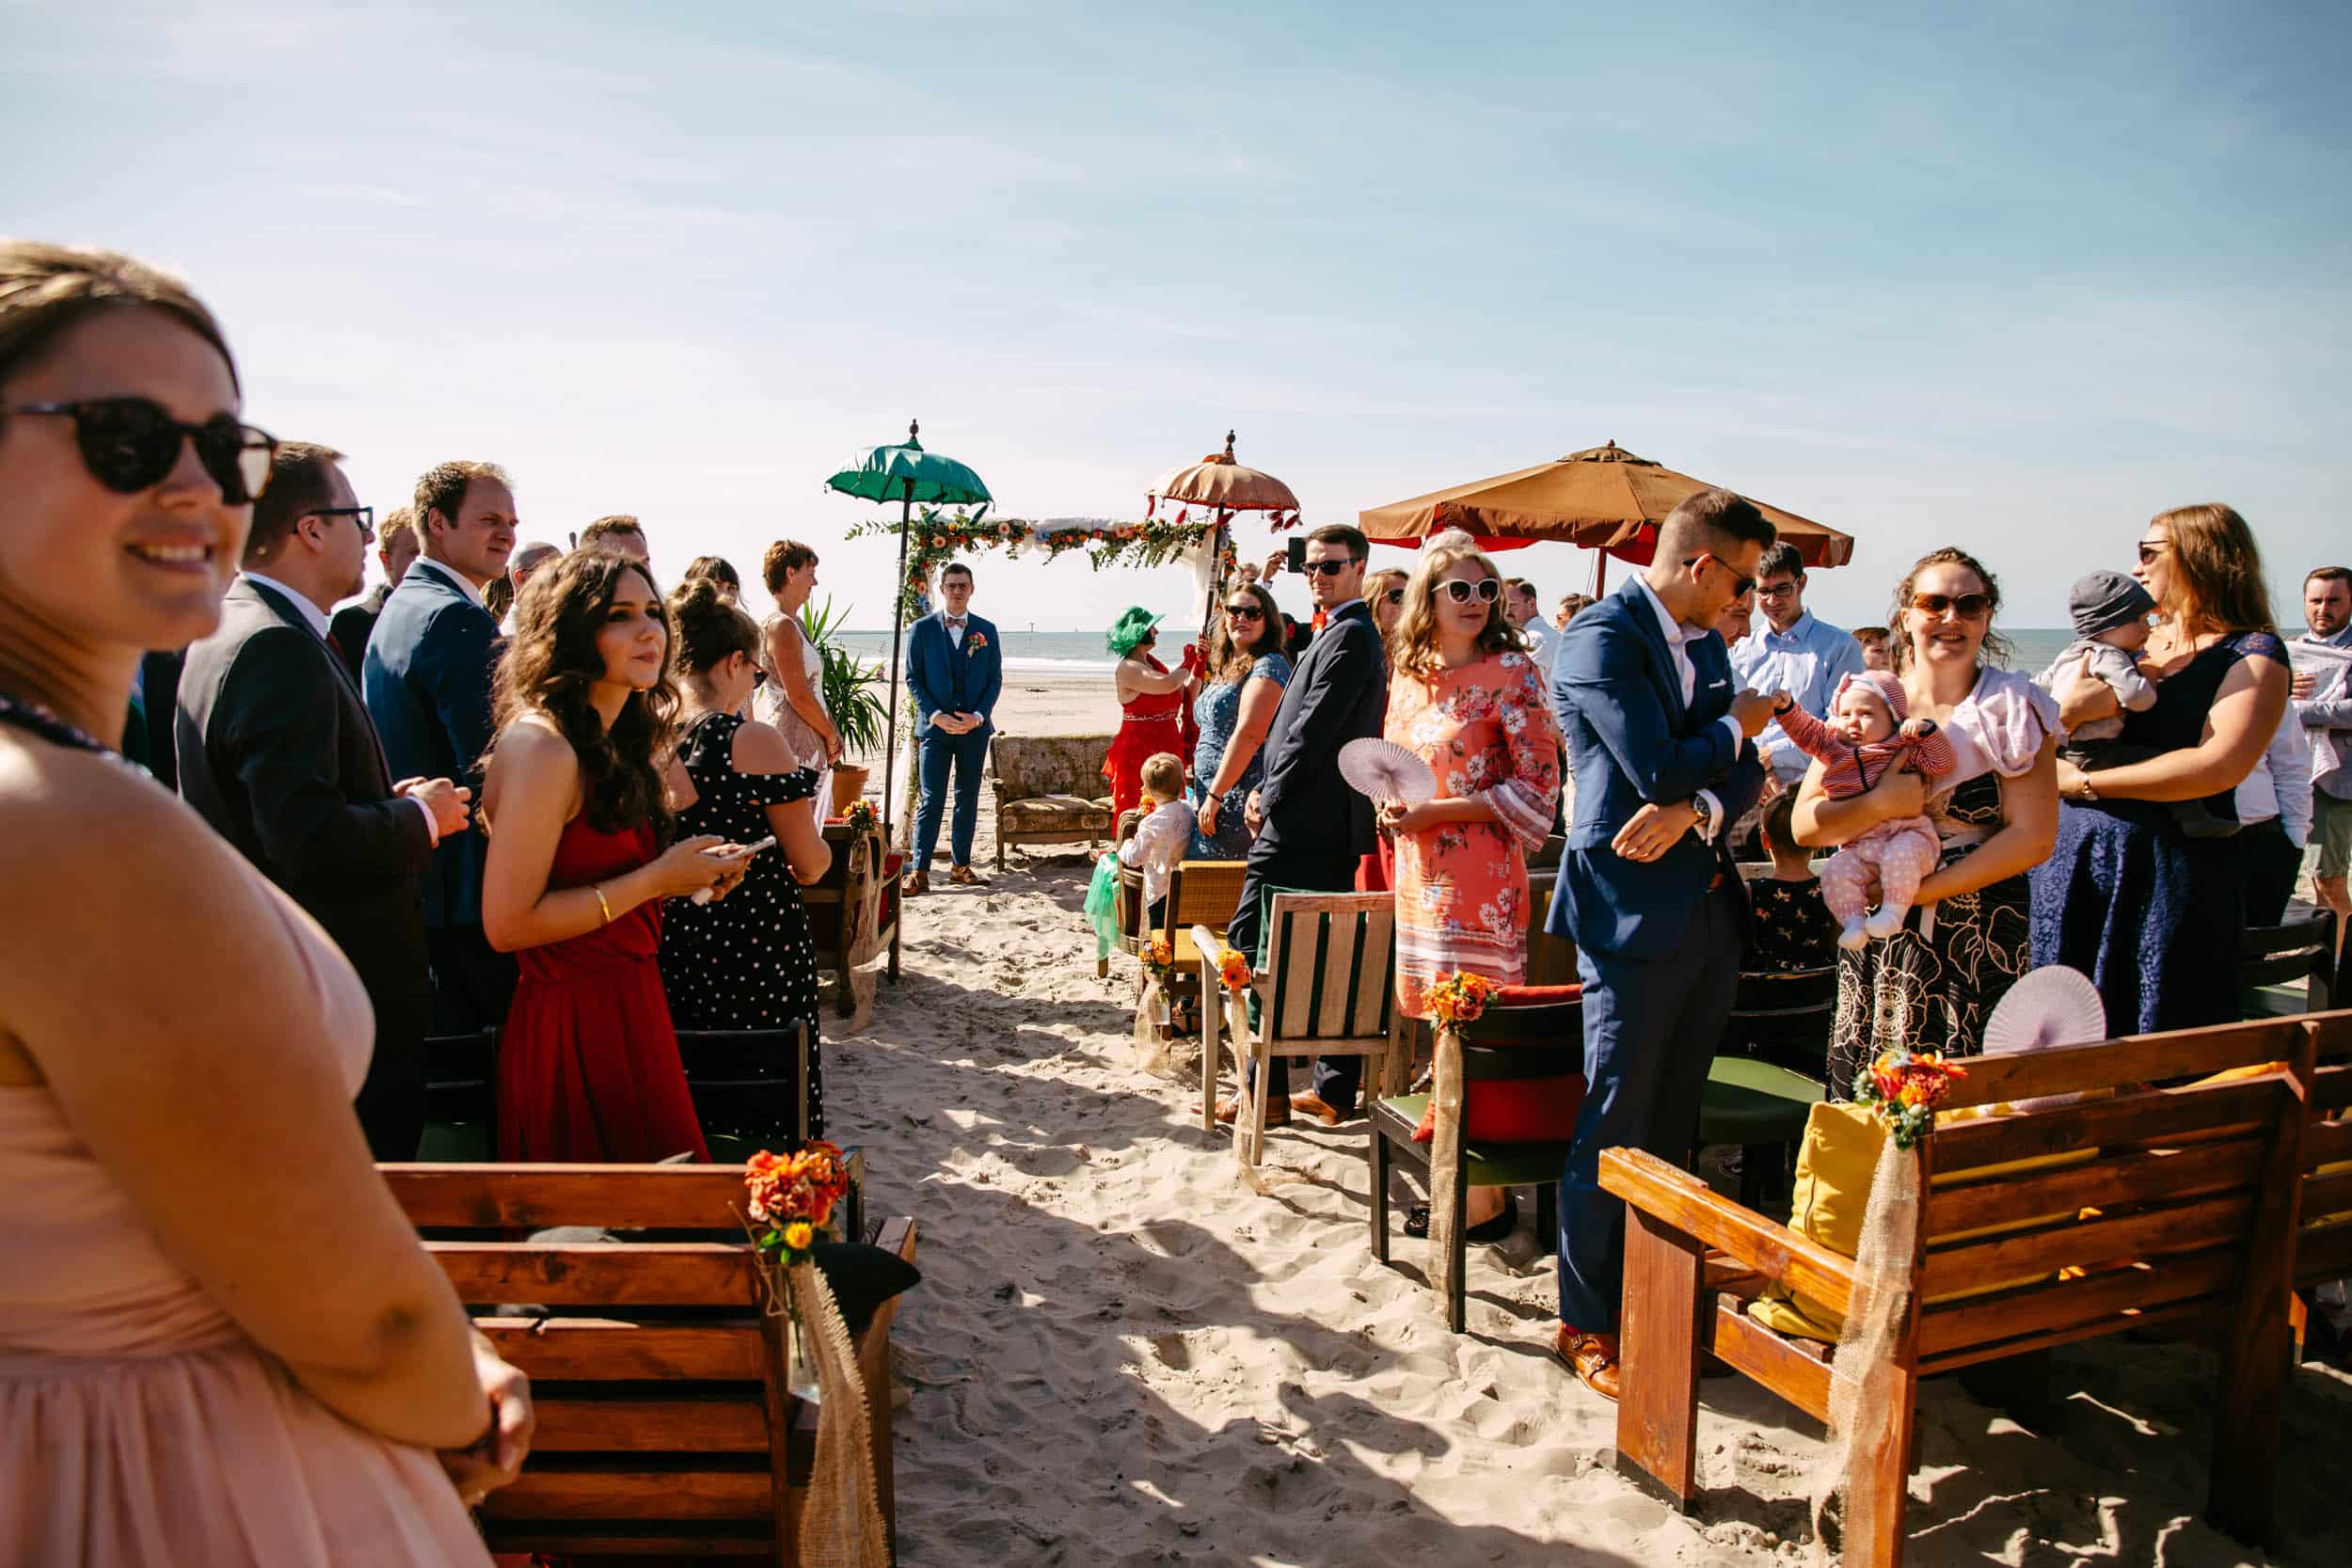 A beach wedding ceremony that many people watch.